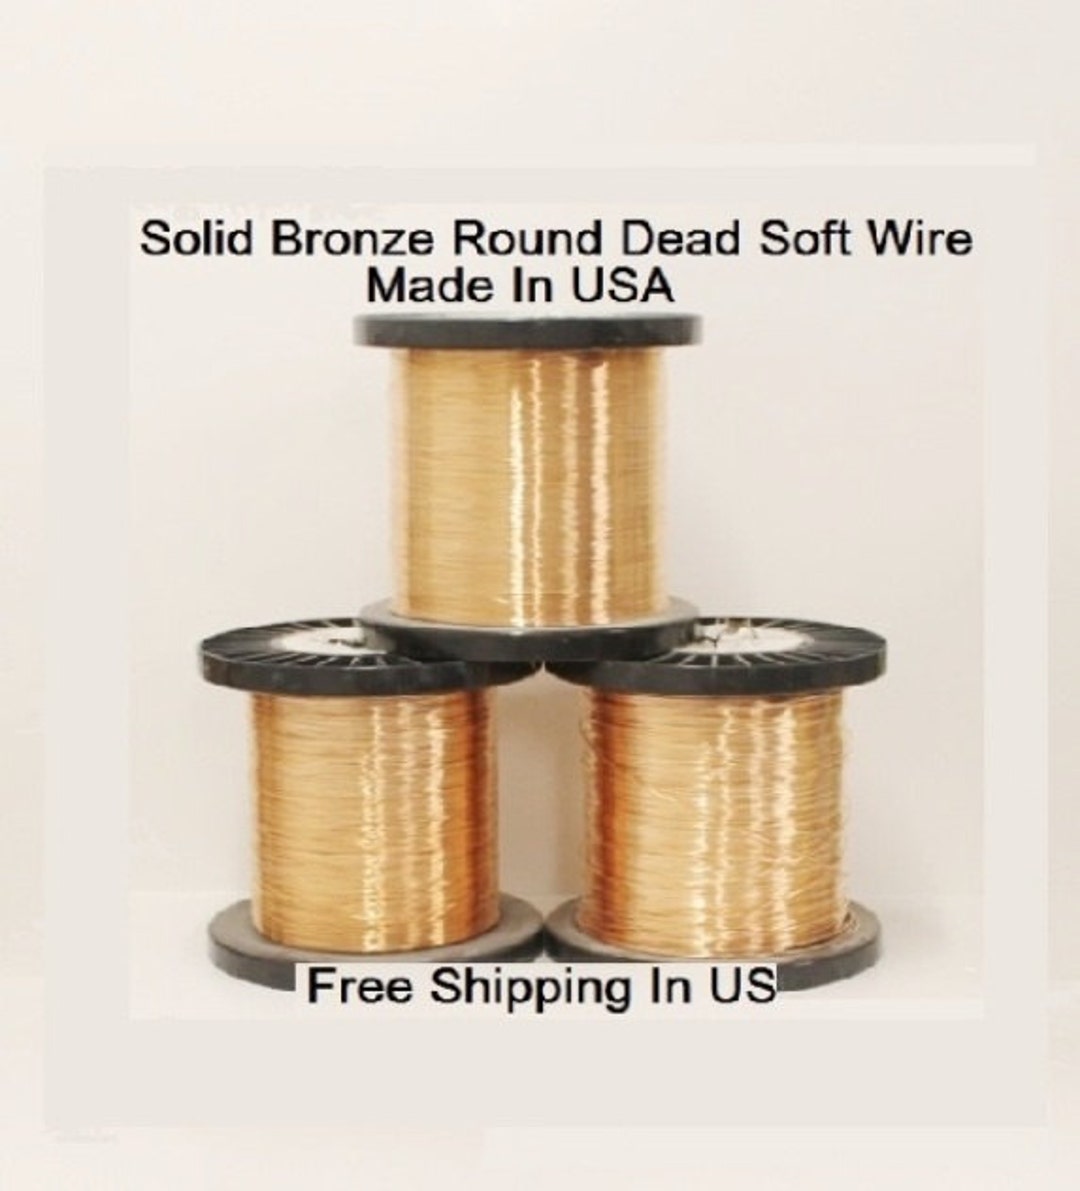 Bare Copper Wire,Dead Soft for Hobby,Craft, Jewelry Making 18,20,22, and 24ga (Assorted 4 Sizes 25 ft Each)